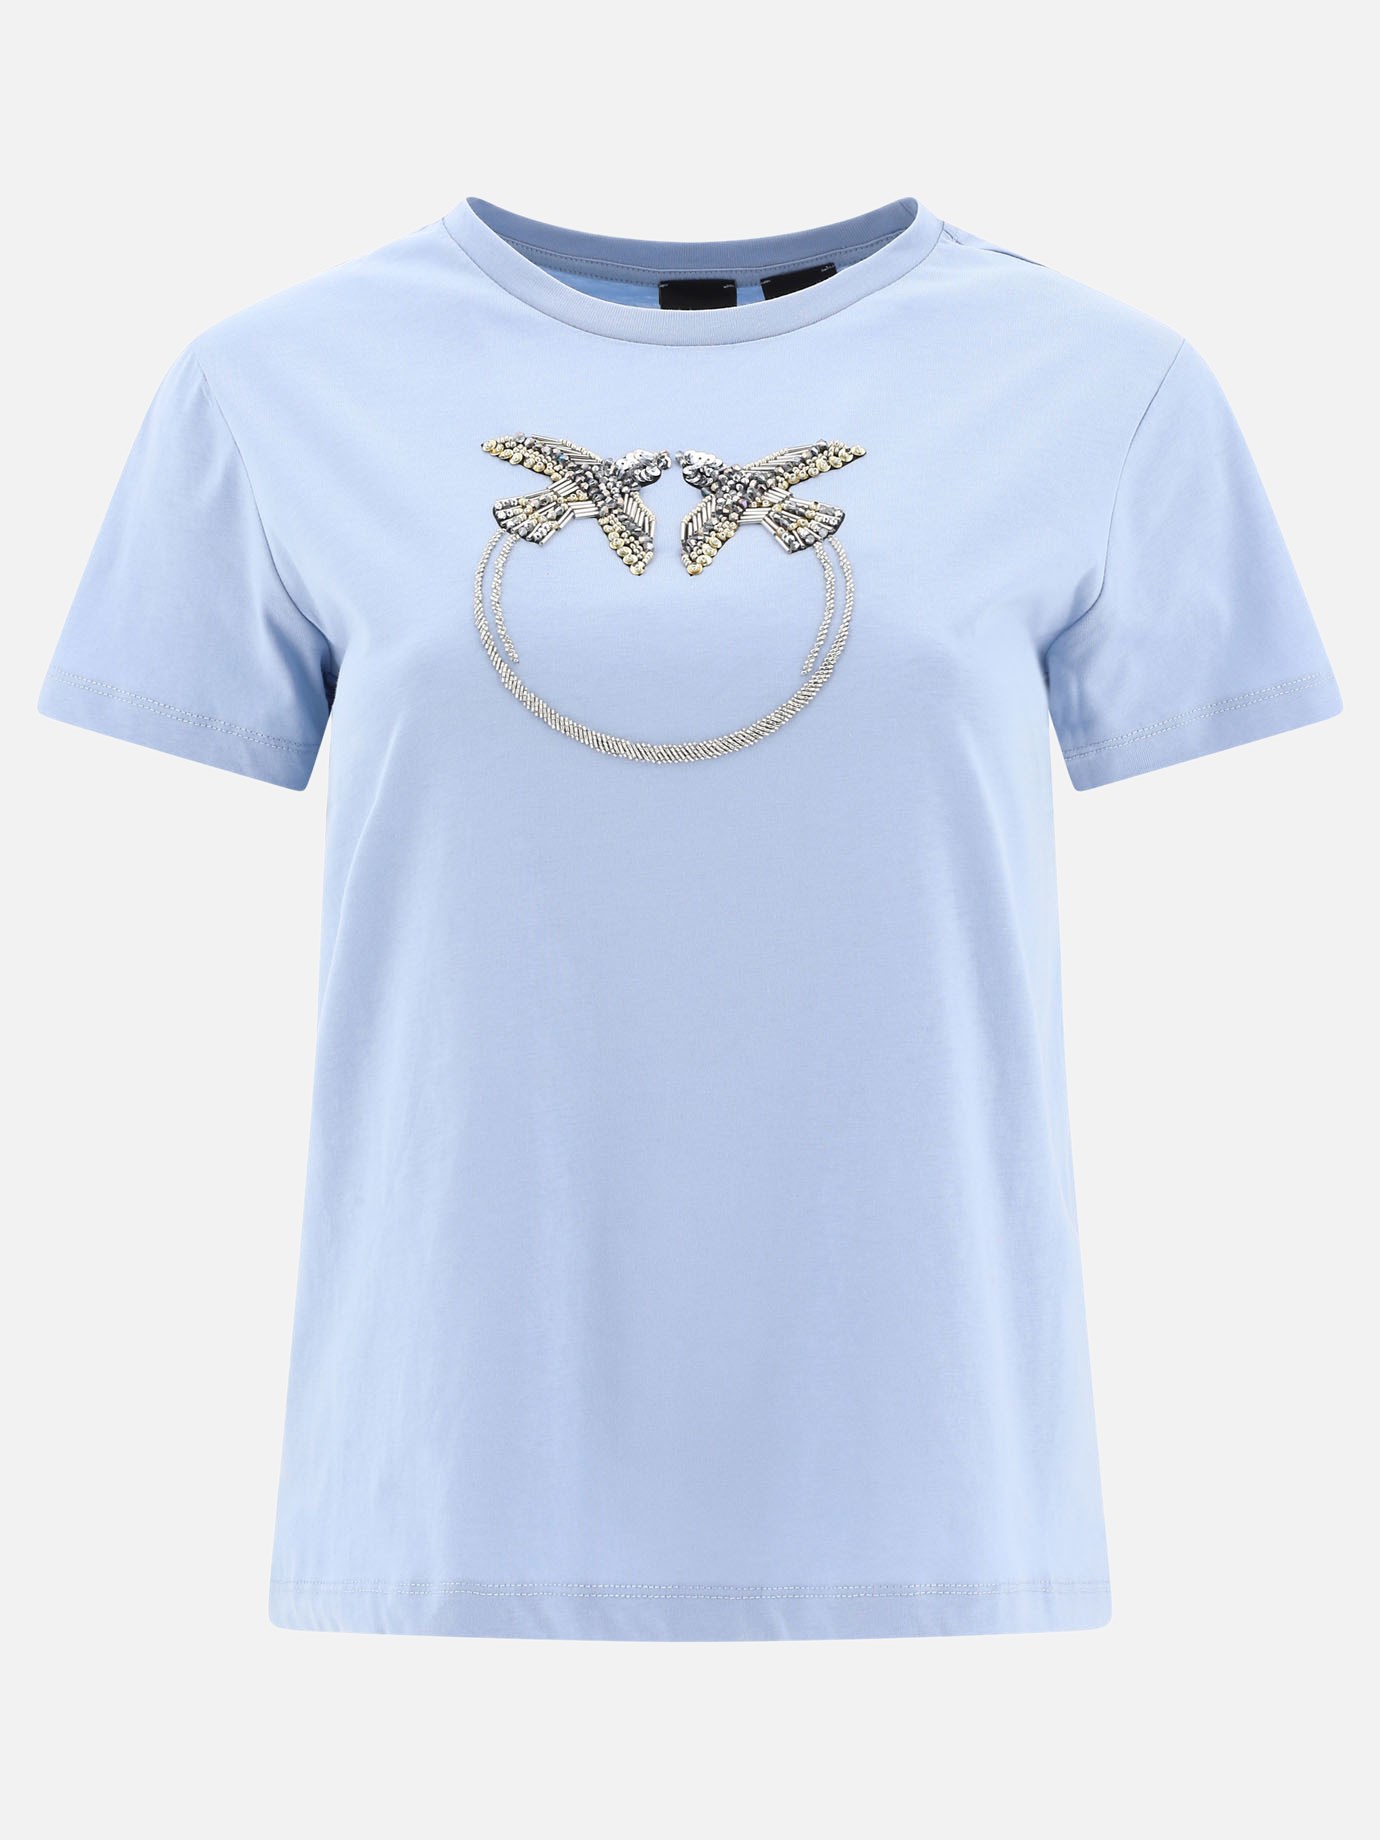 T-shirt  Quentin  by Pinko